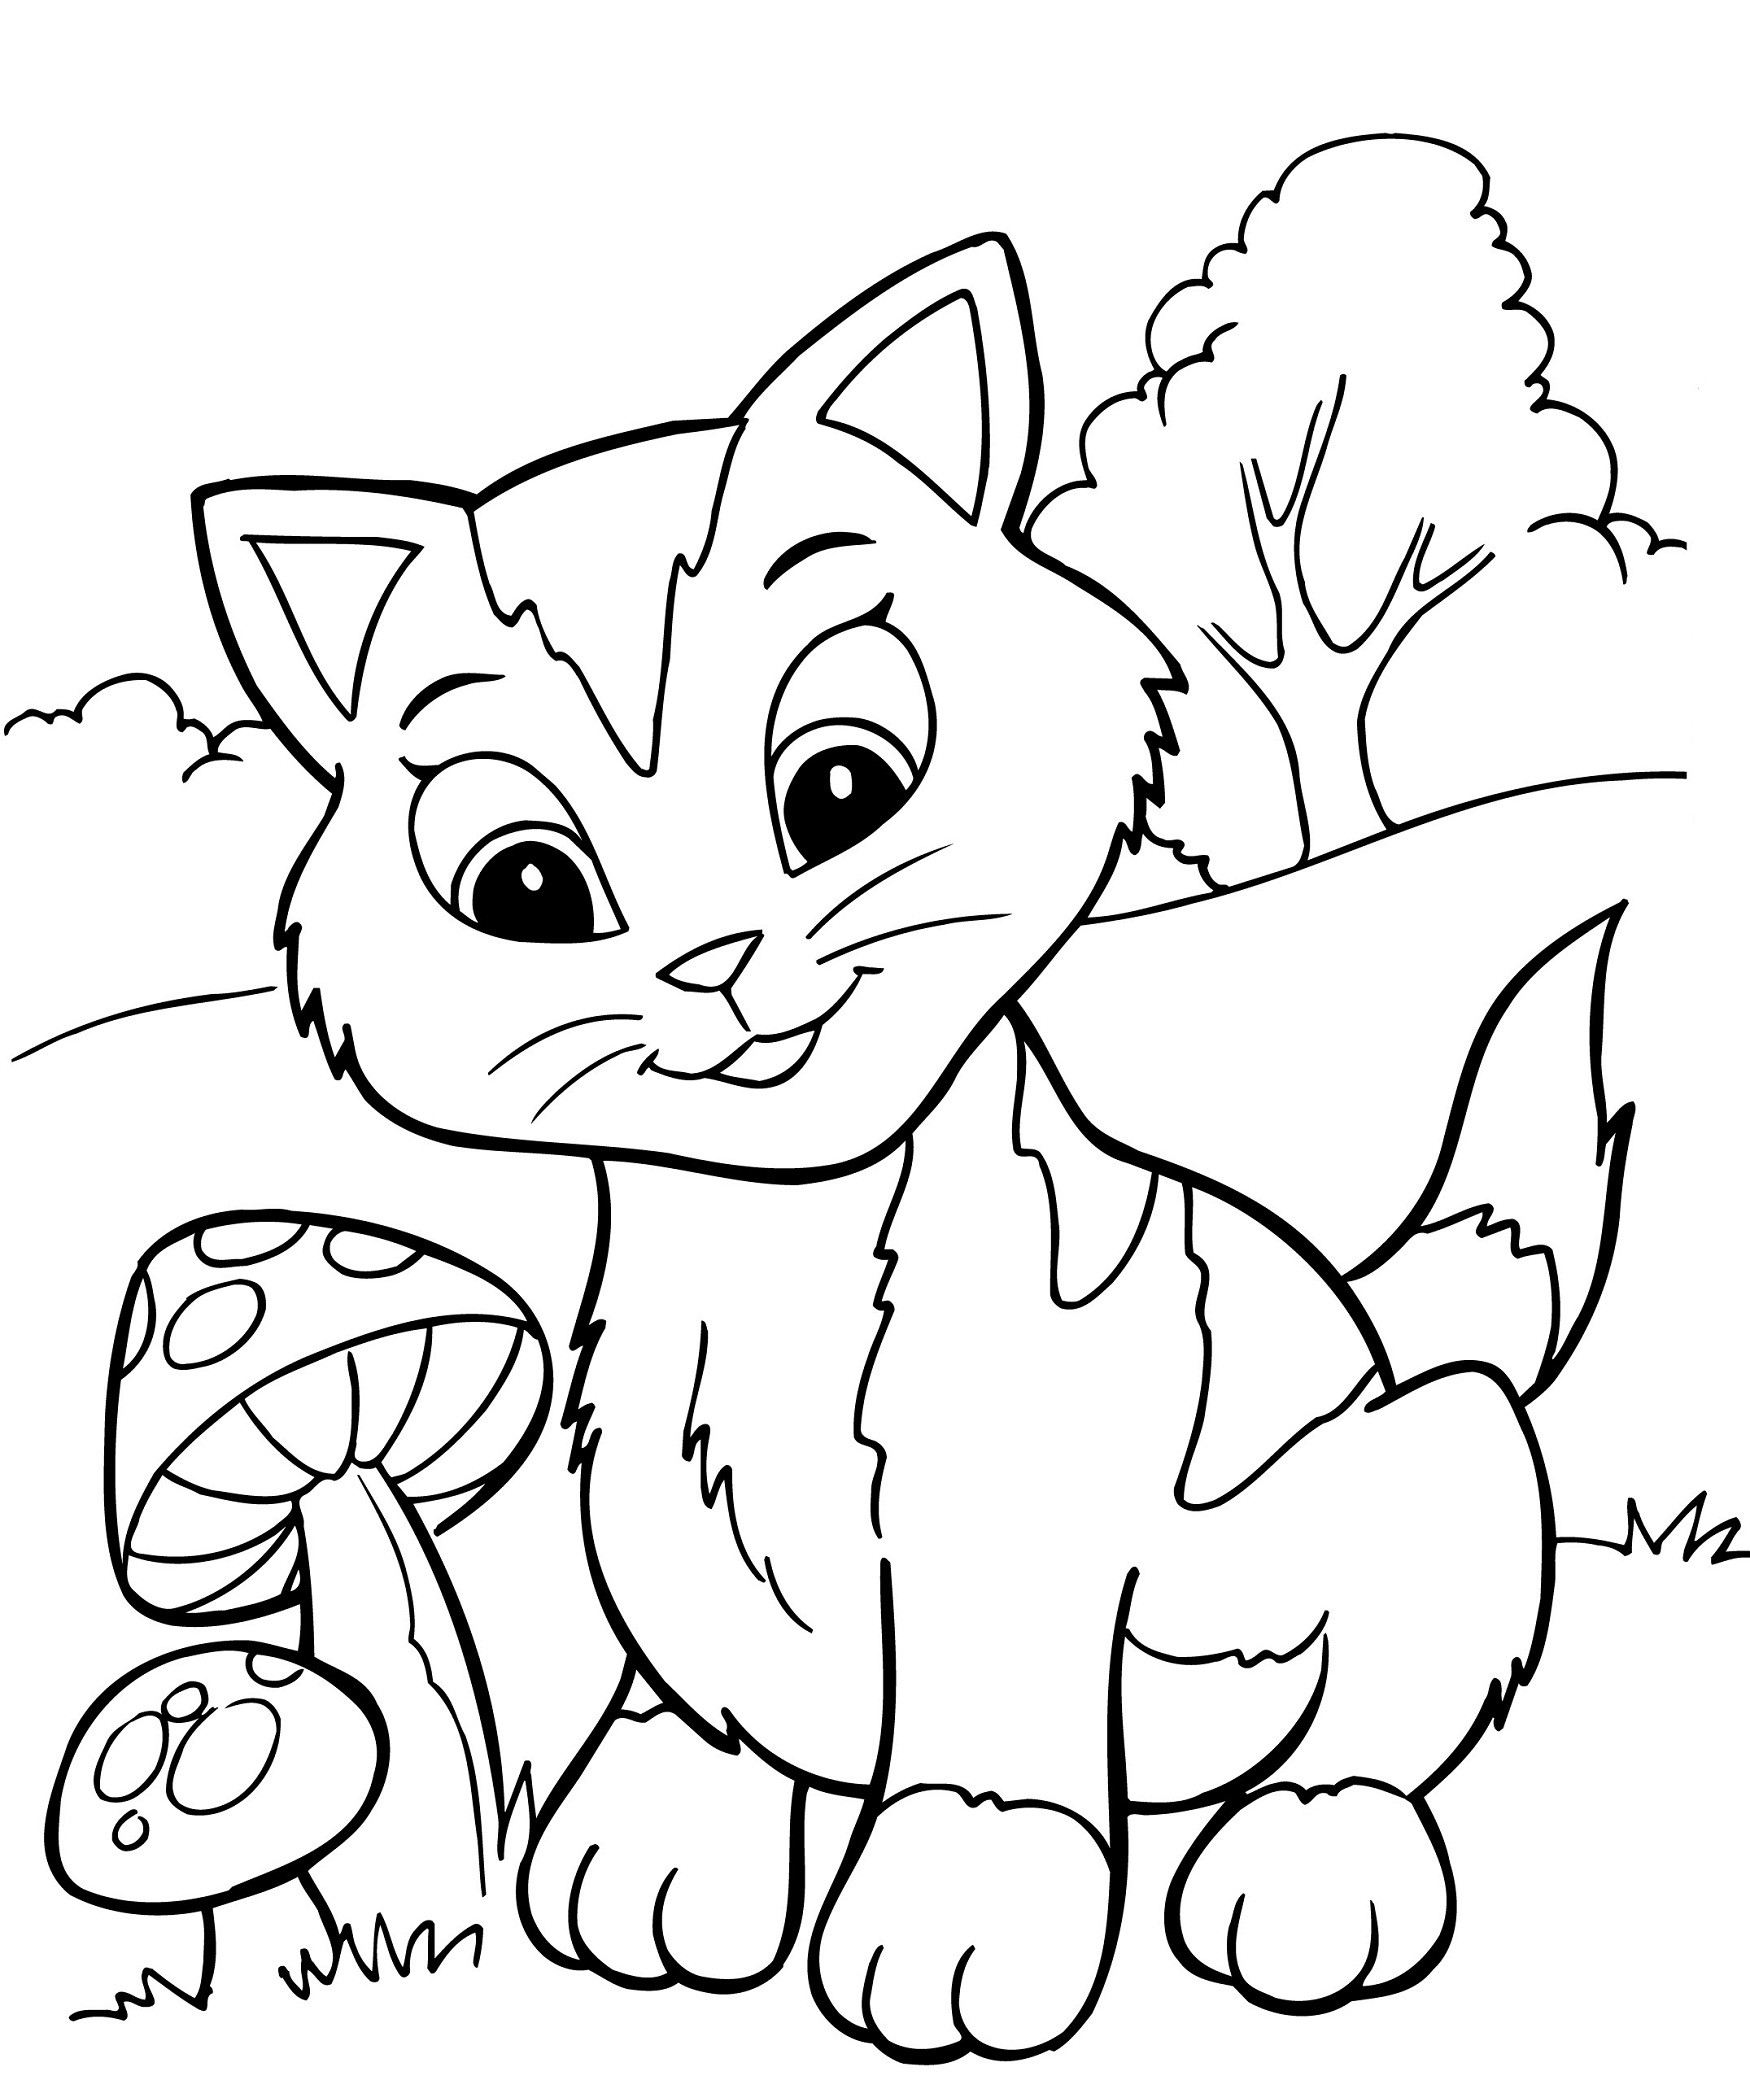 Printable Cat Coloring Pages For Kids
 Free Printable Kitten Coloring Pages For Kids Best